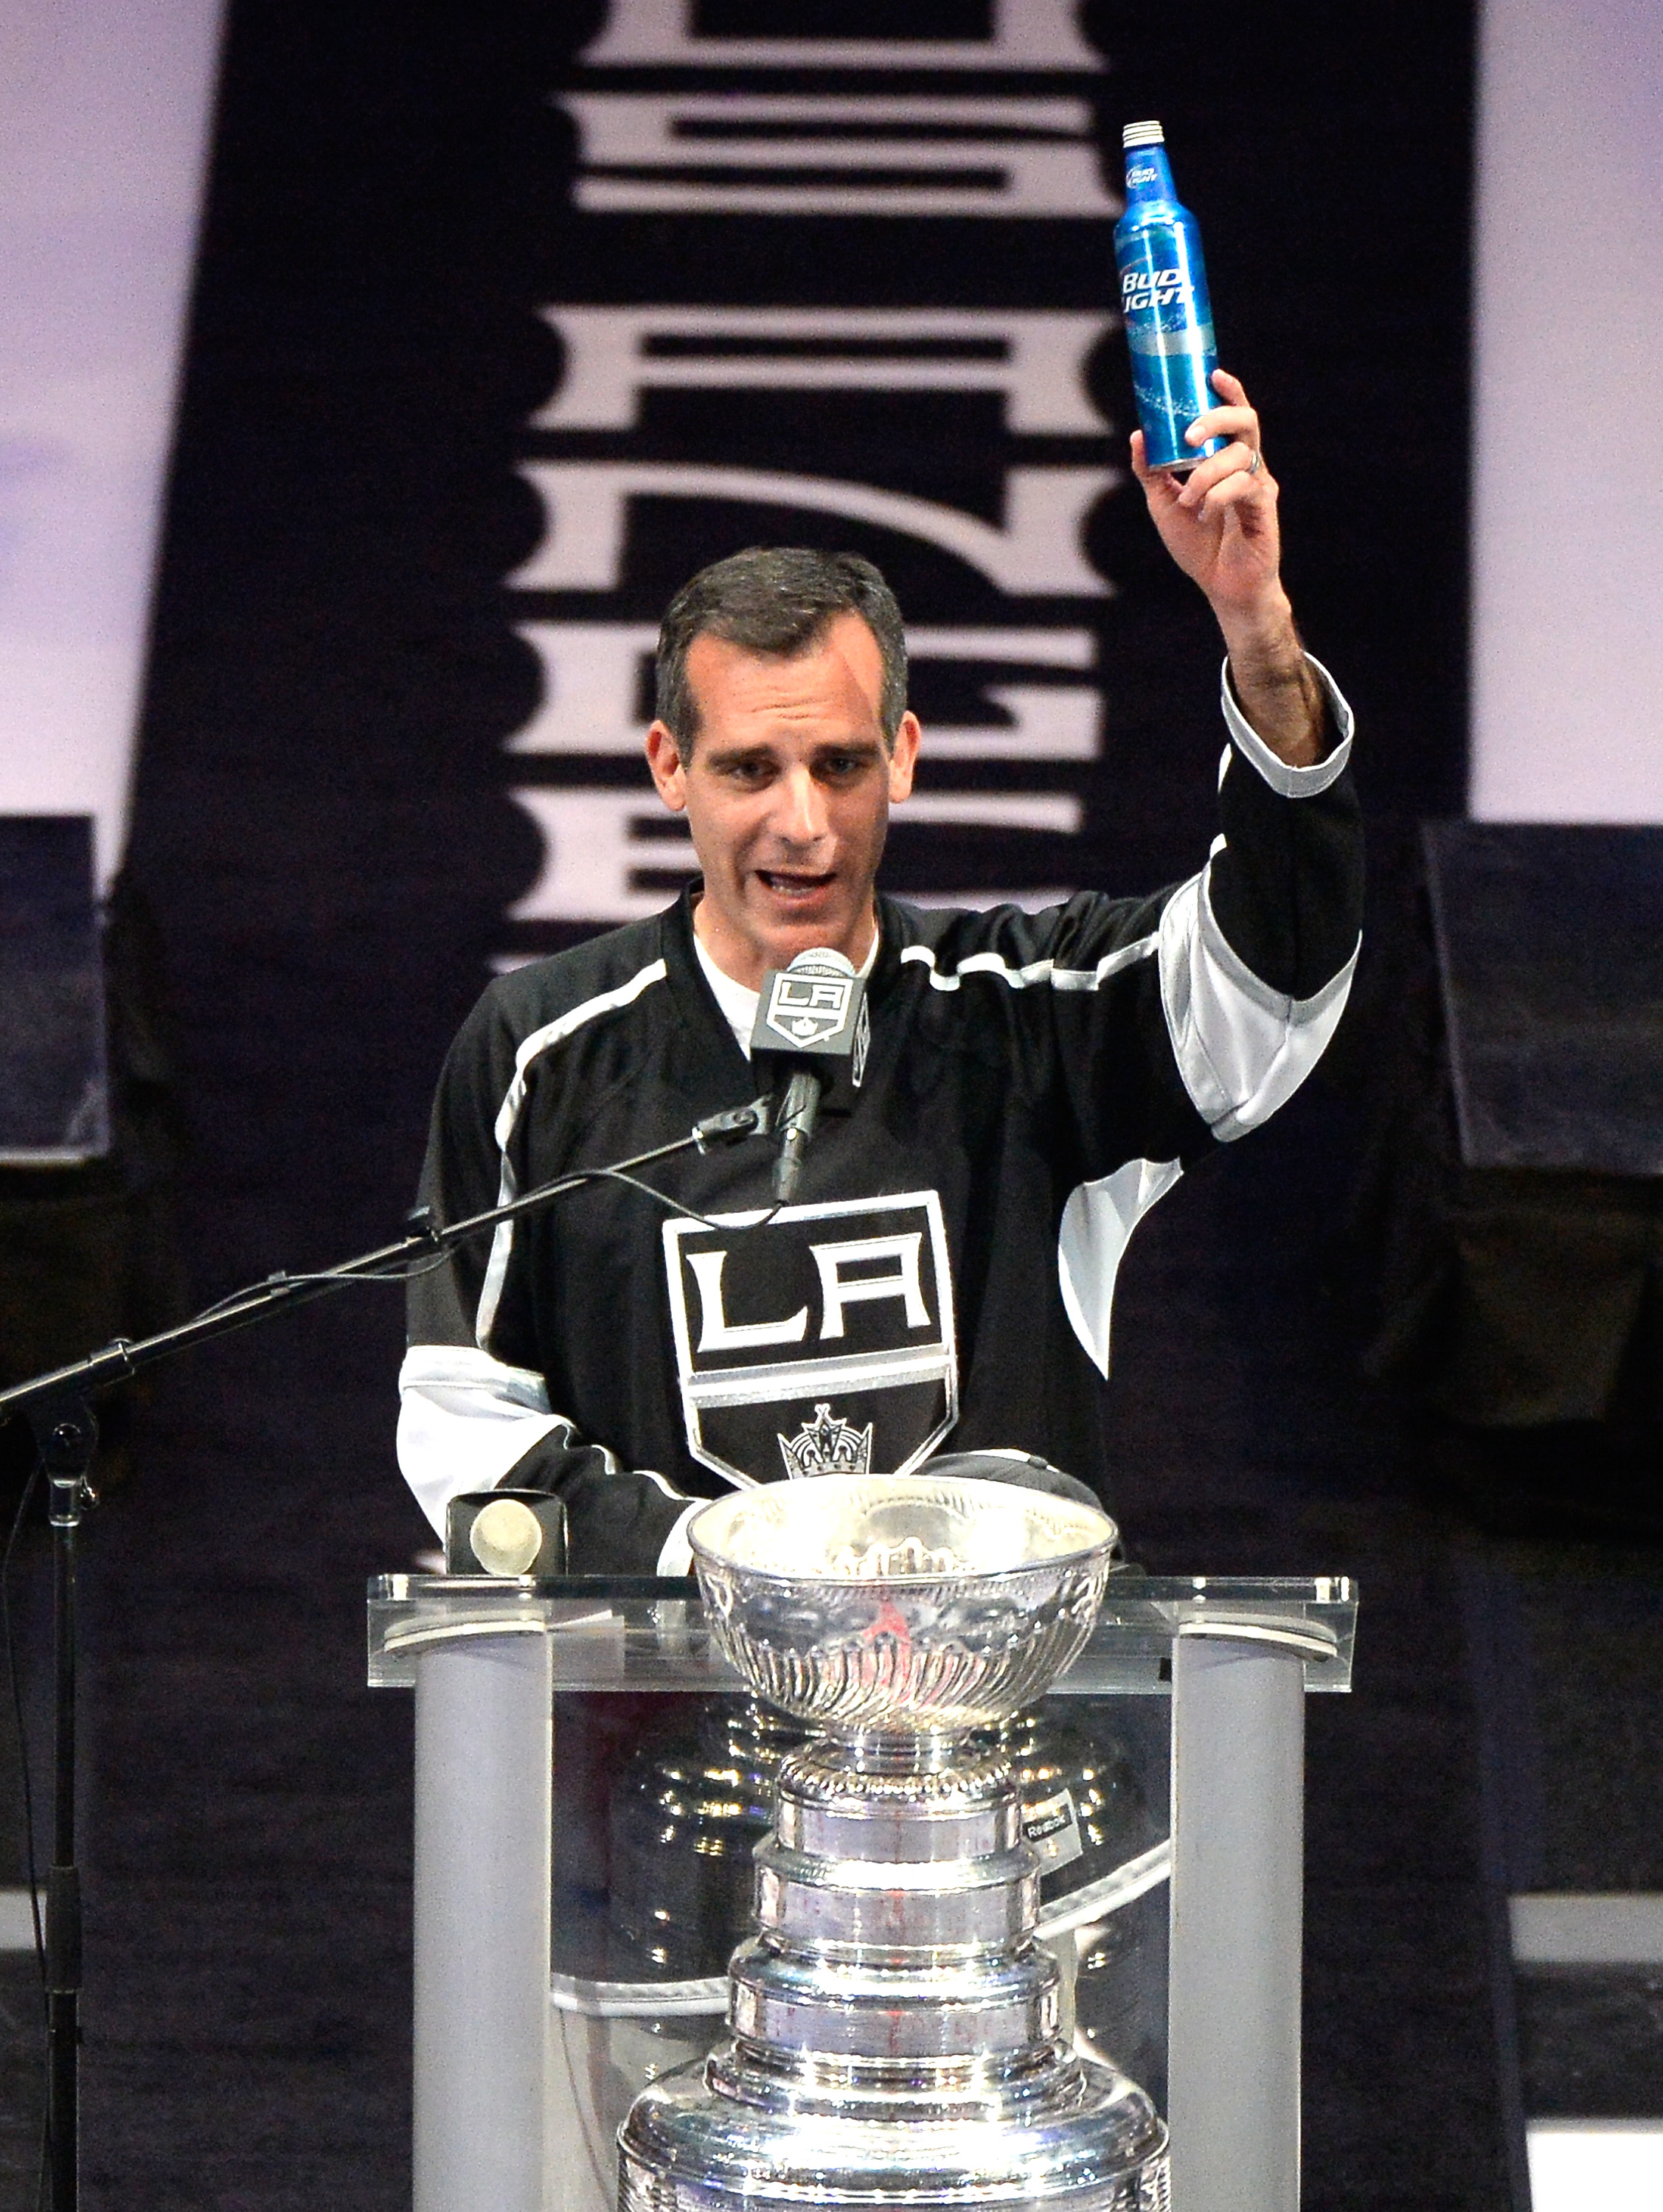 Los Angeles Kings Mayor Eric Garcetti raises a beer and swears during the Los Angeles Kings Victory Parade and Rally on June 16, 2014 in Los Angeles, California. (Harry How&mdash;Getty Images)